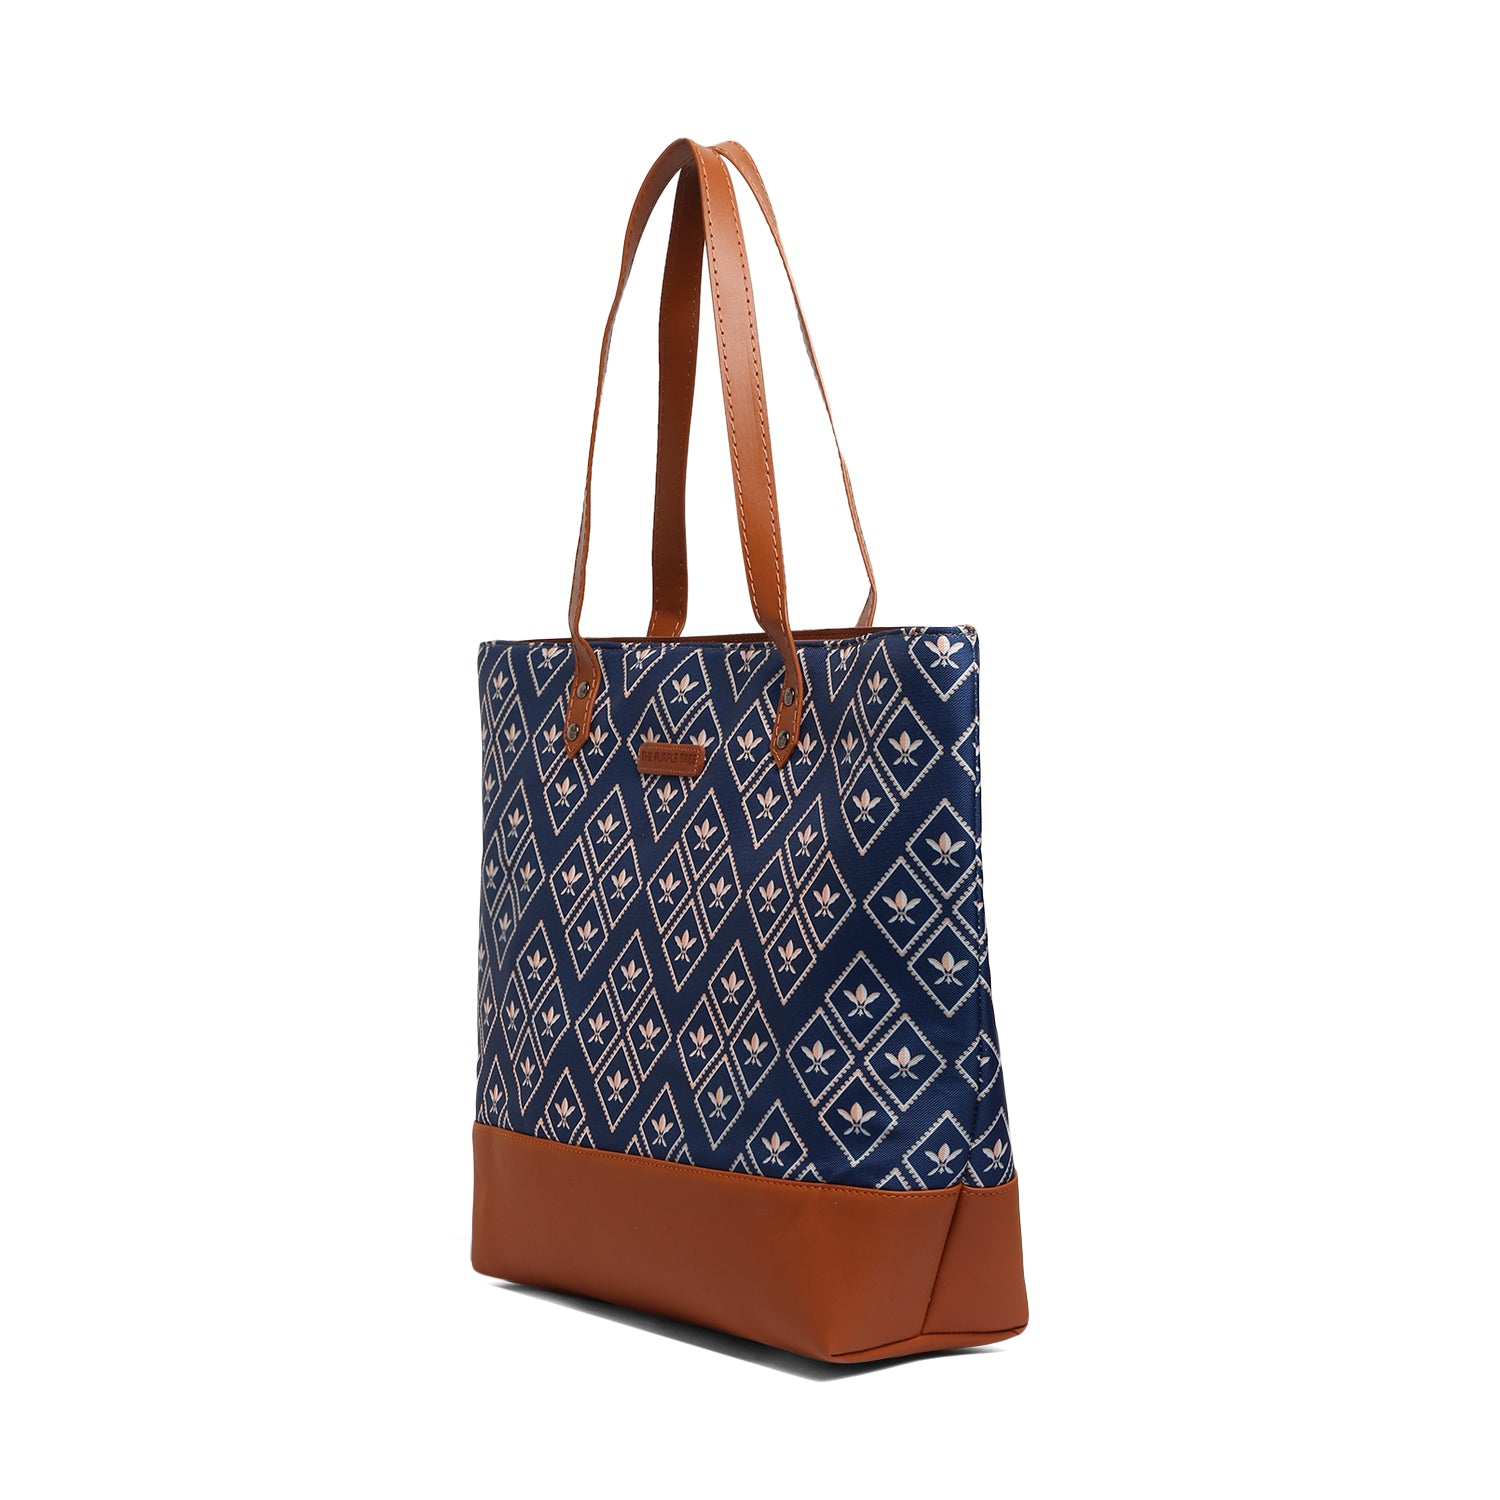 Blue and brown tote bag placed near wooden chair